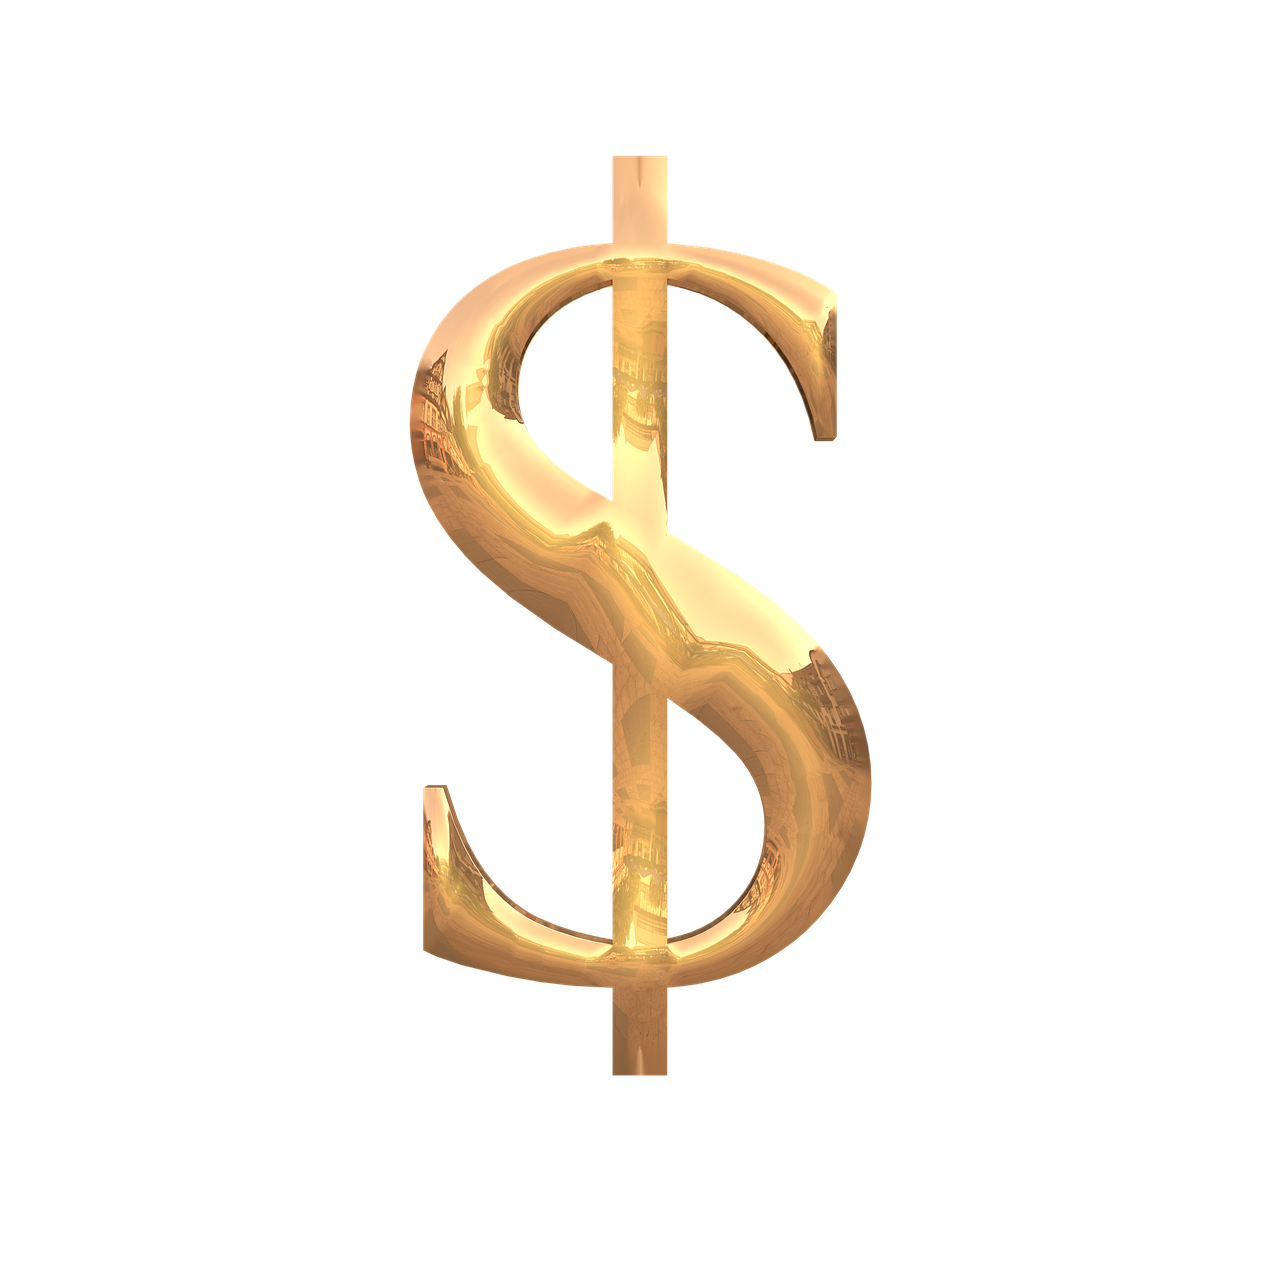 currency sign currency symbol free photo